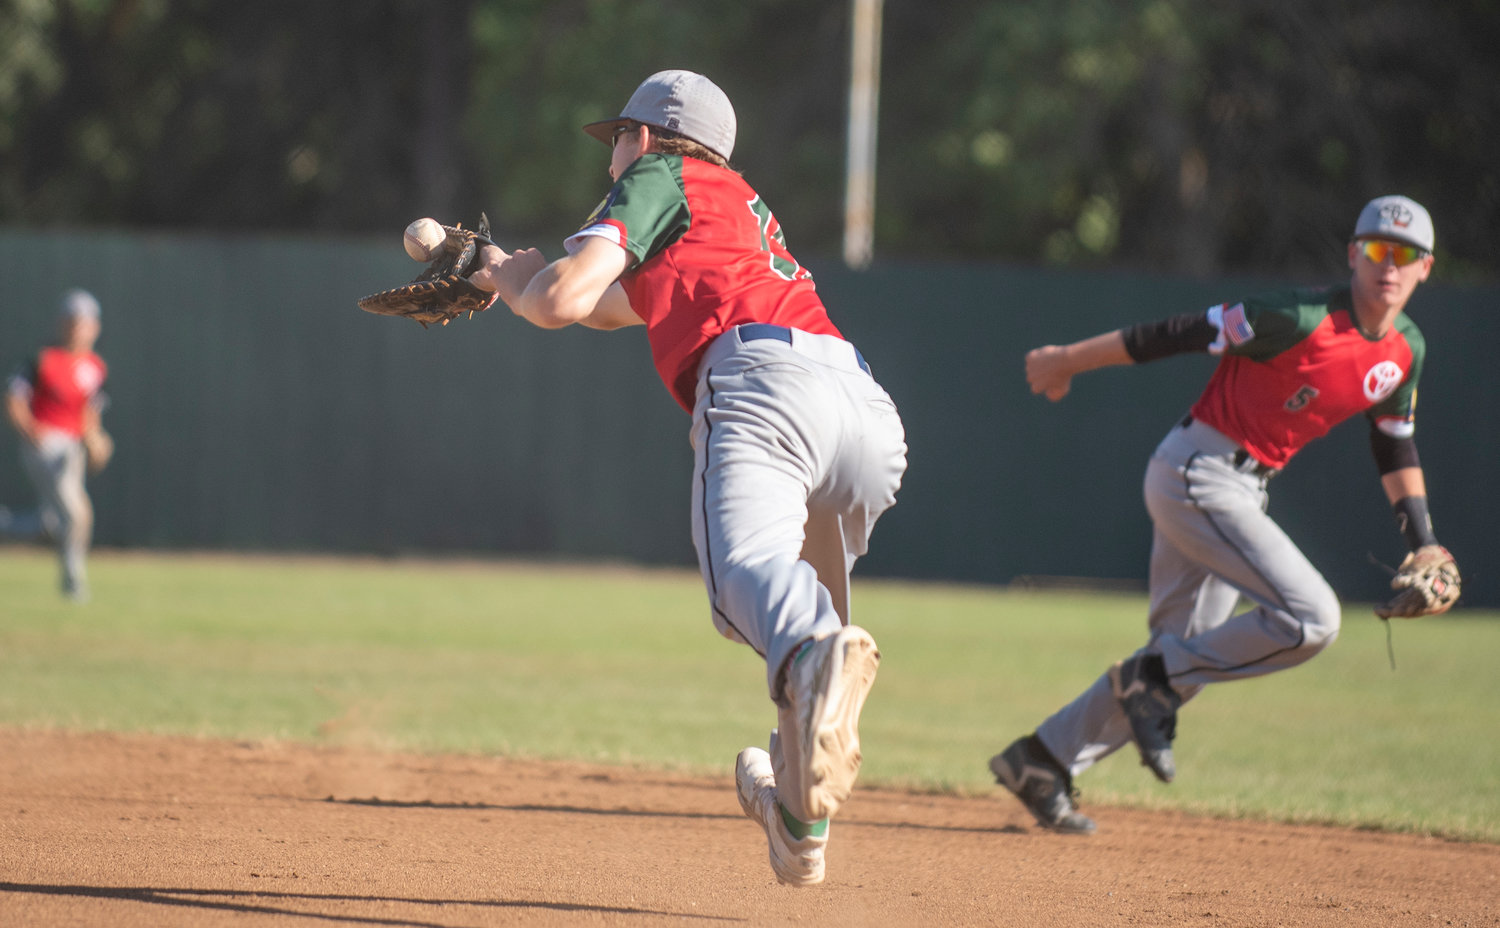 I-5 Toyota/Mountain Dew’s Lethon Fitch, left, snags a grounder near first base while second baseman Brady Sprague (5) watches in the background.